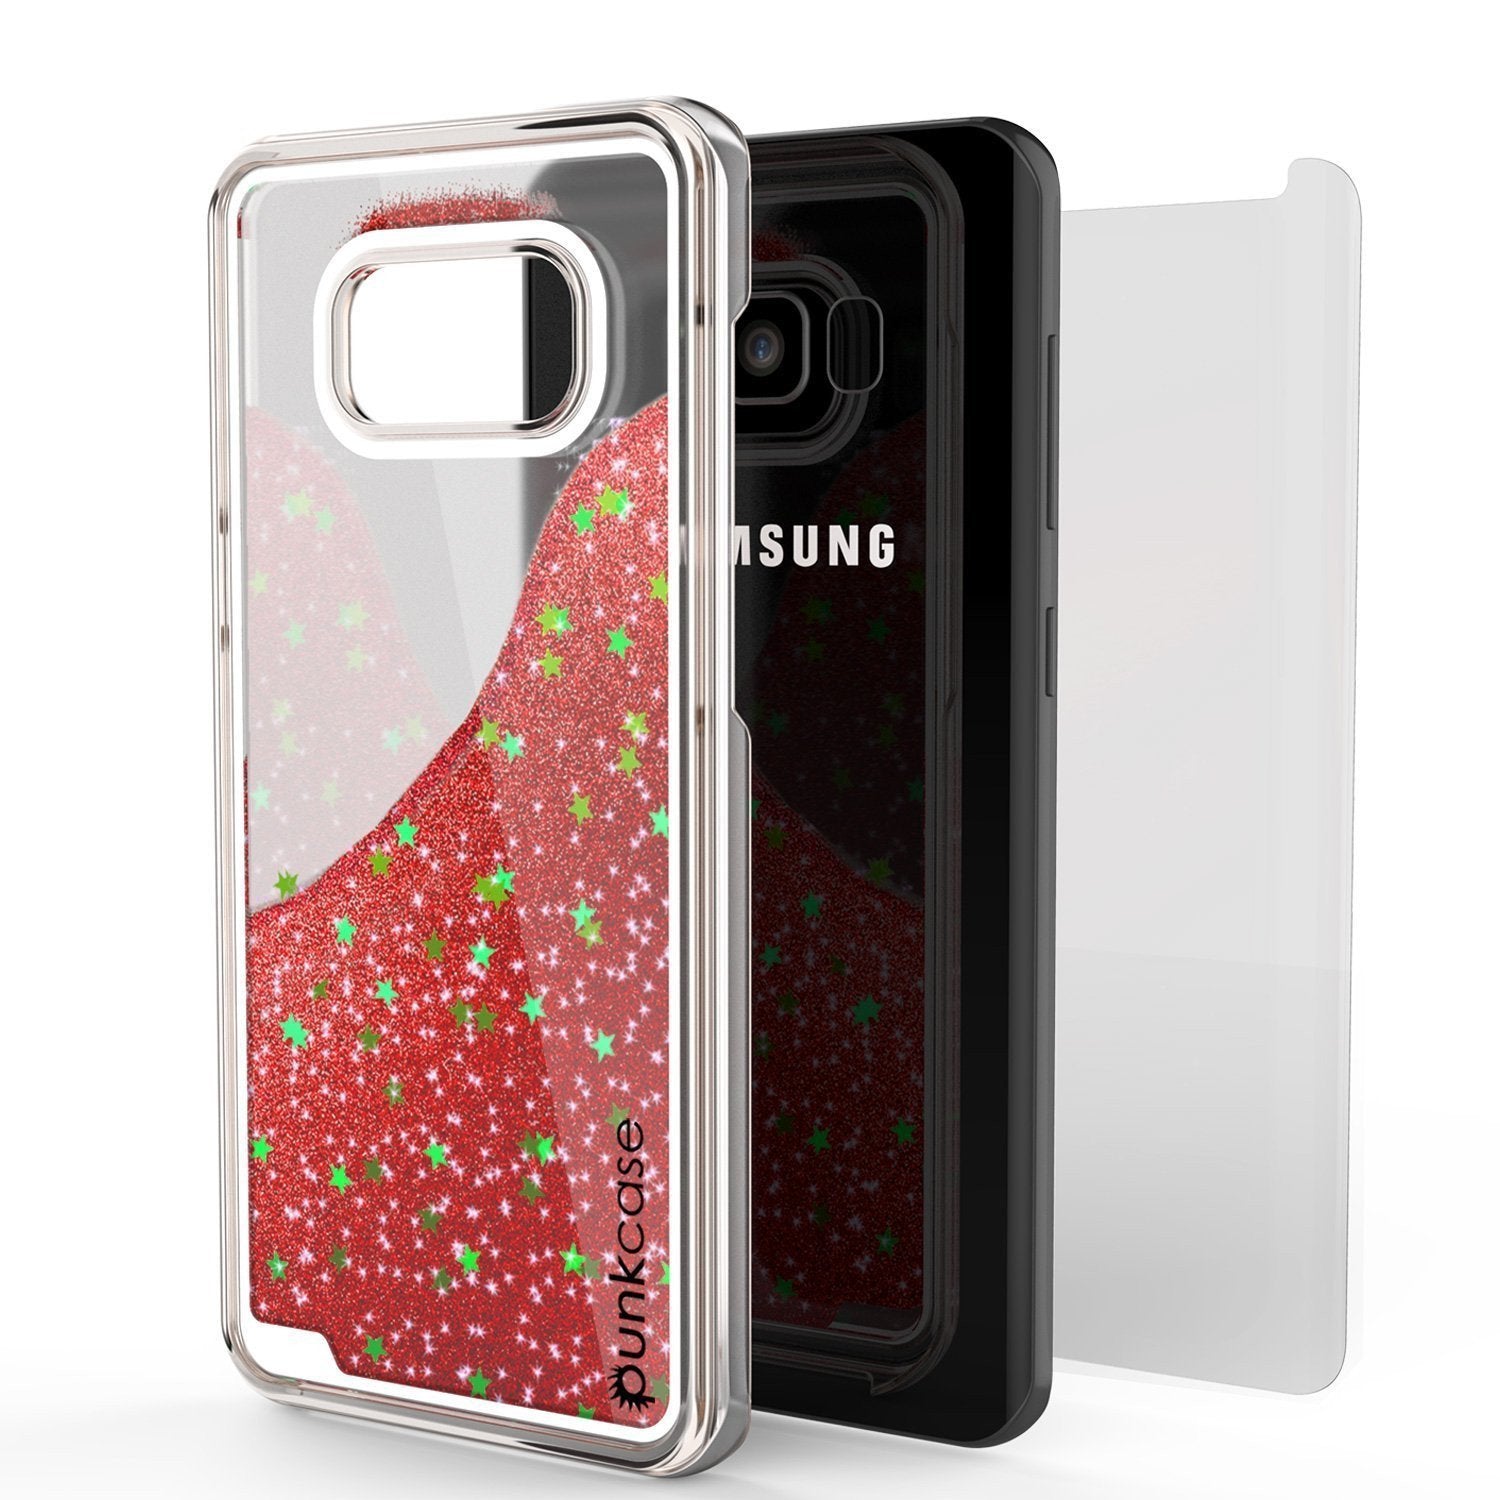 S8 Plus Case, Punkcase Liquid Red Series Protective Dual Layer Cover